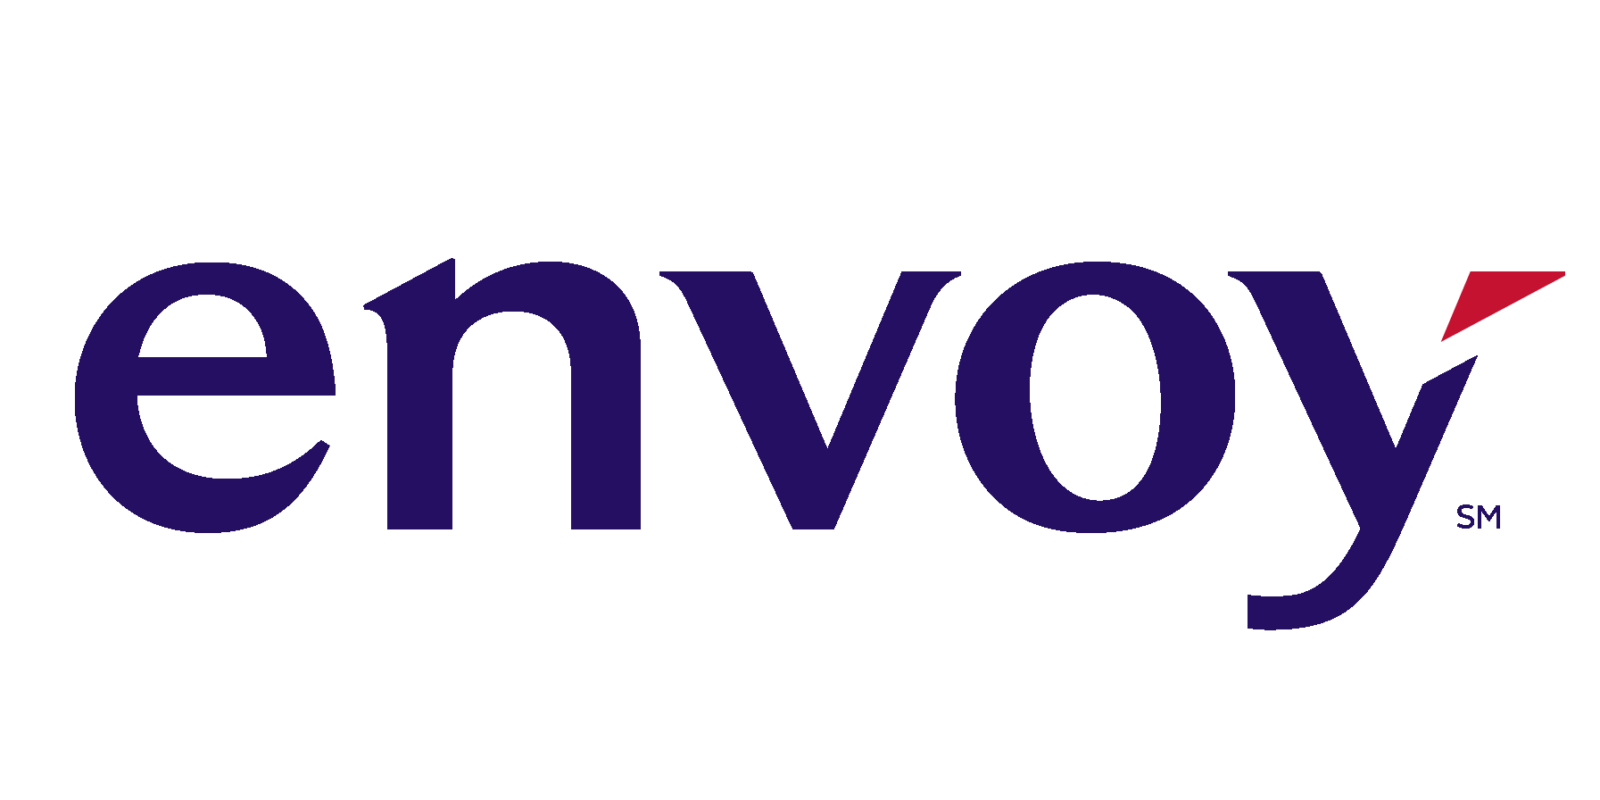 Envoy Airlines logo written in dark blue and purple text